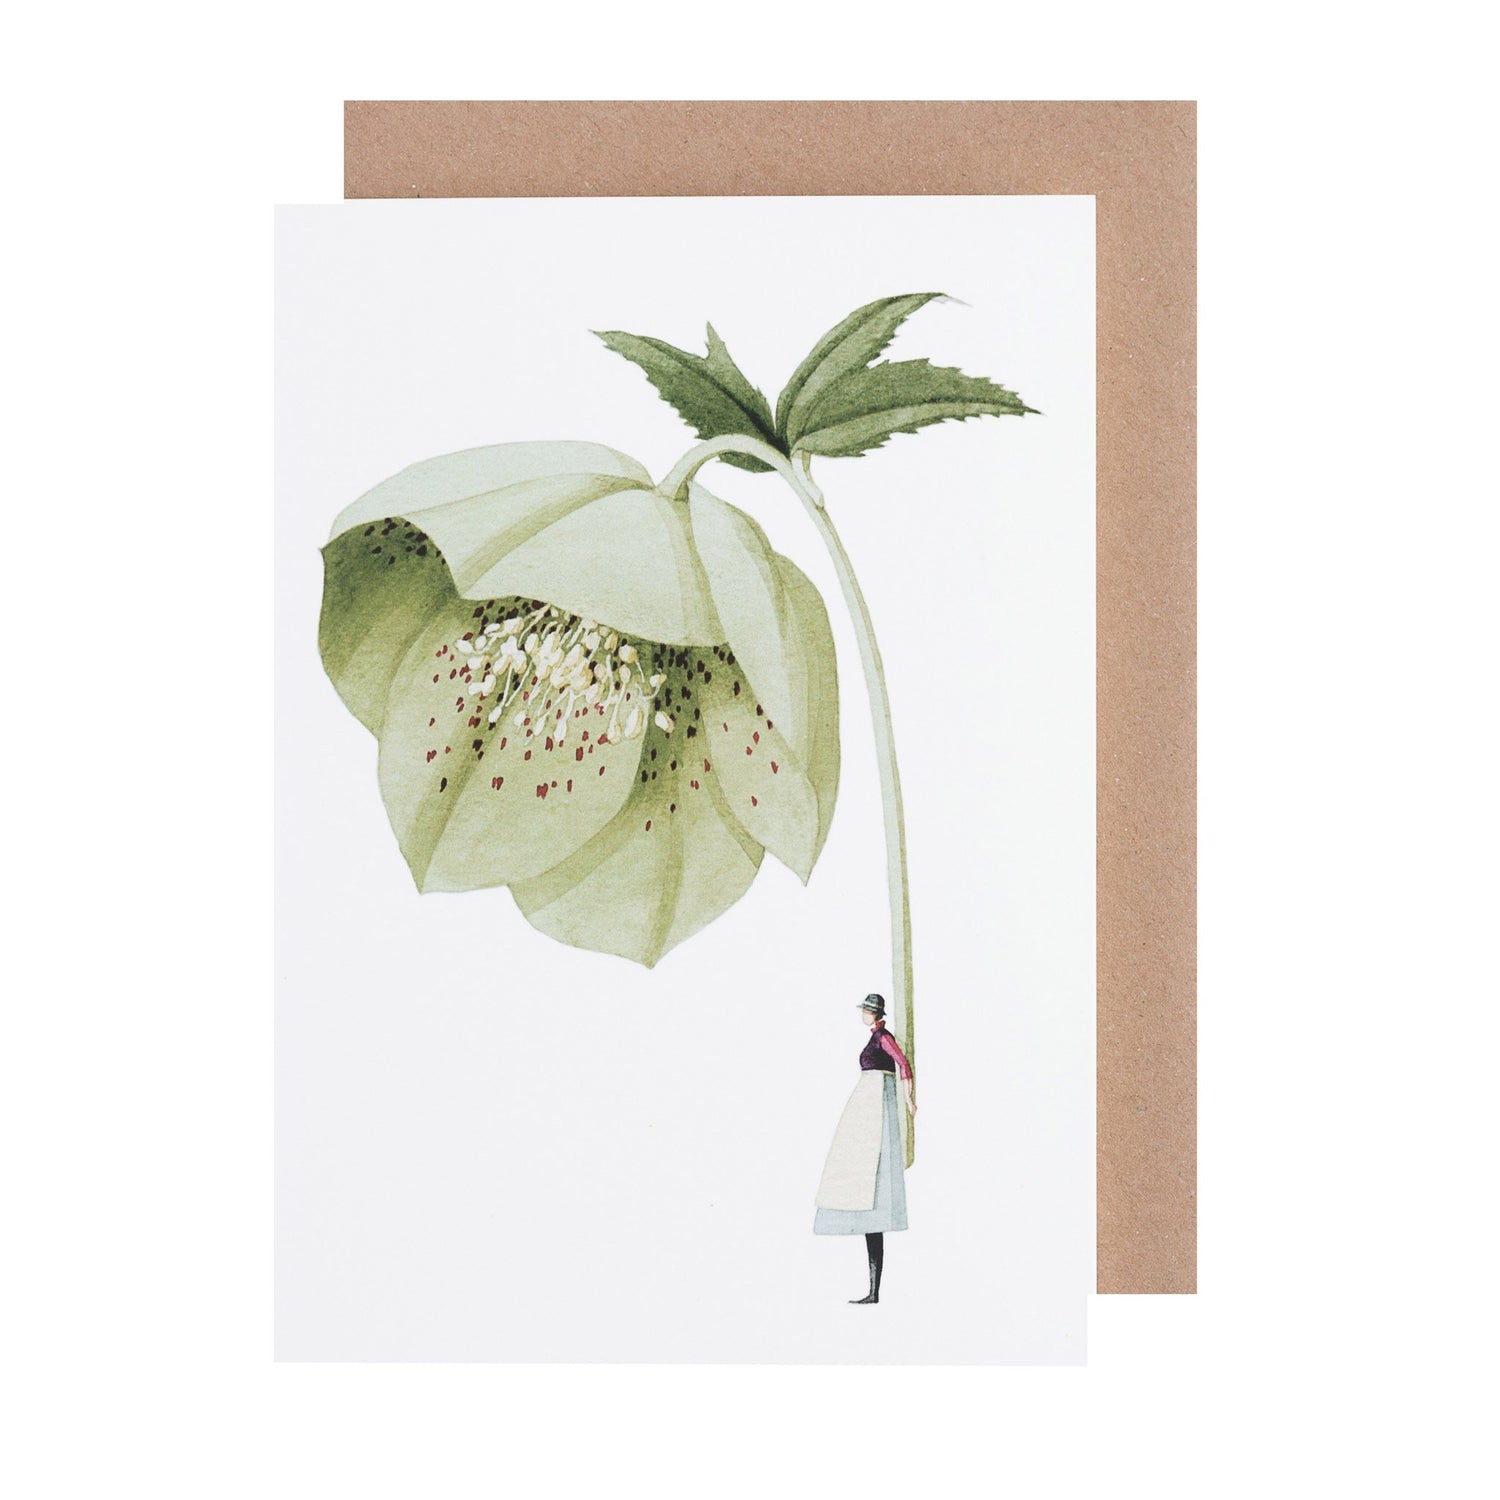 A Hellebore Greeting Card by Hester &amp; Cook with artwork of a woman standing next to a flower, printed on environmentally sustainable paper.